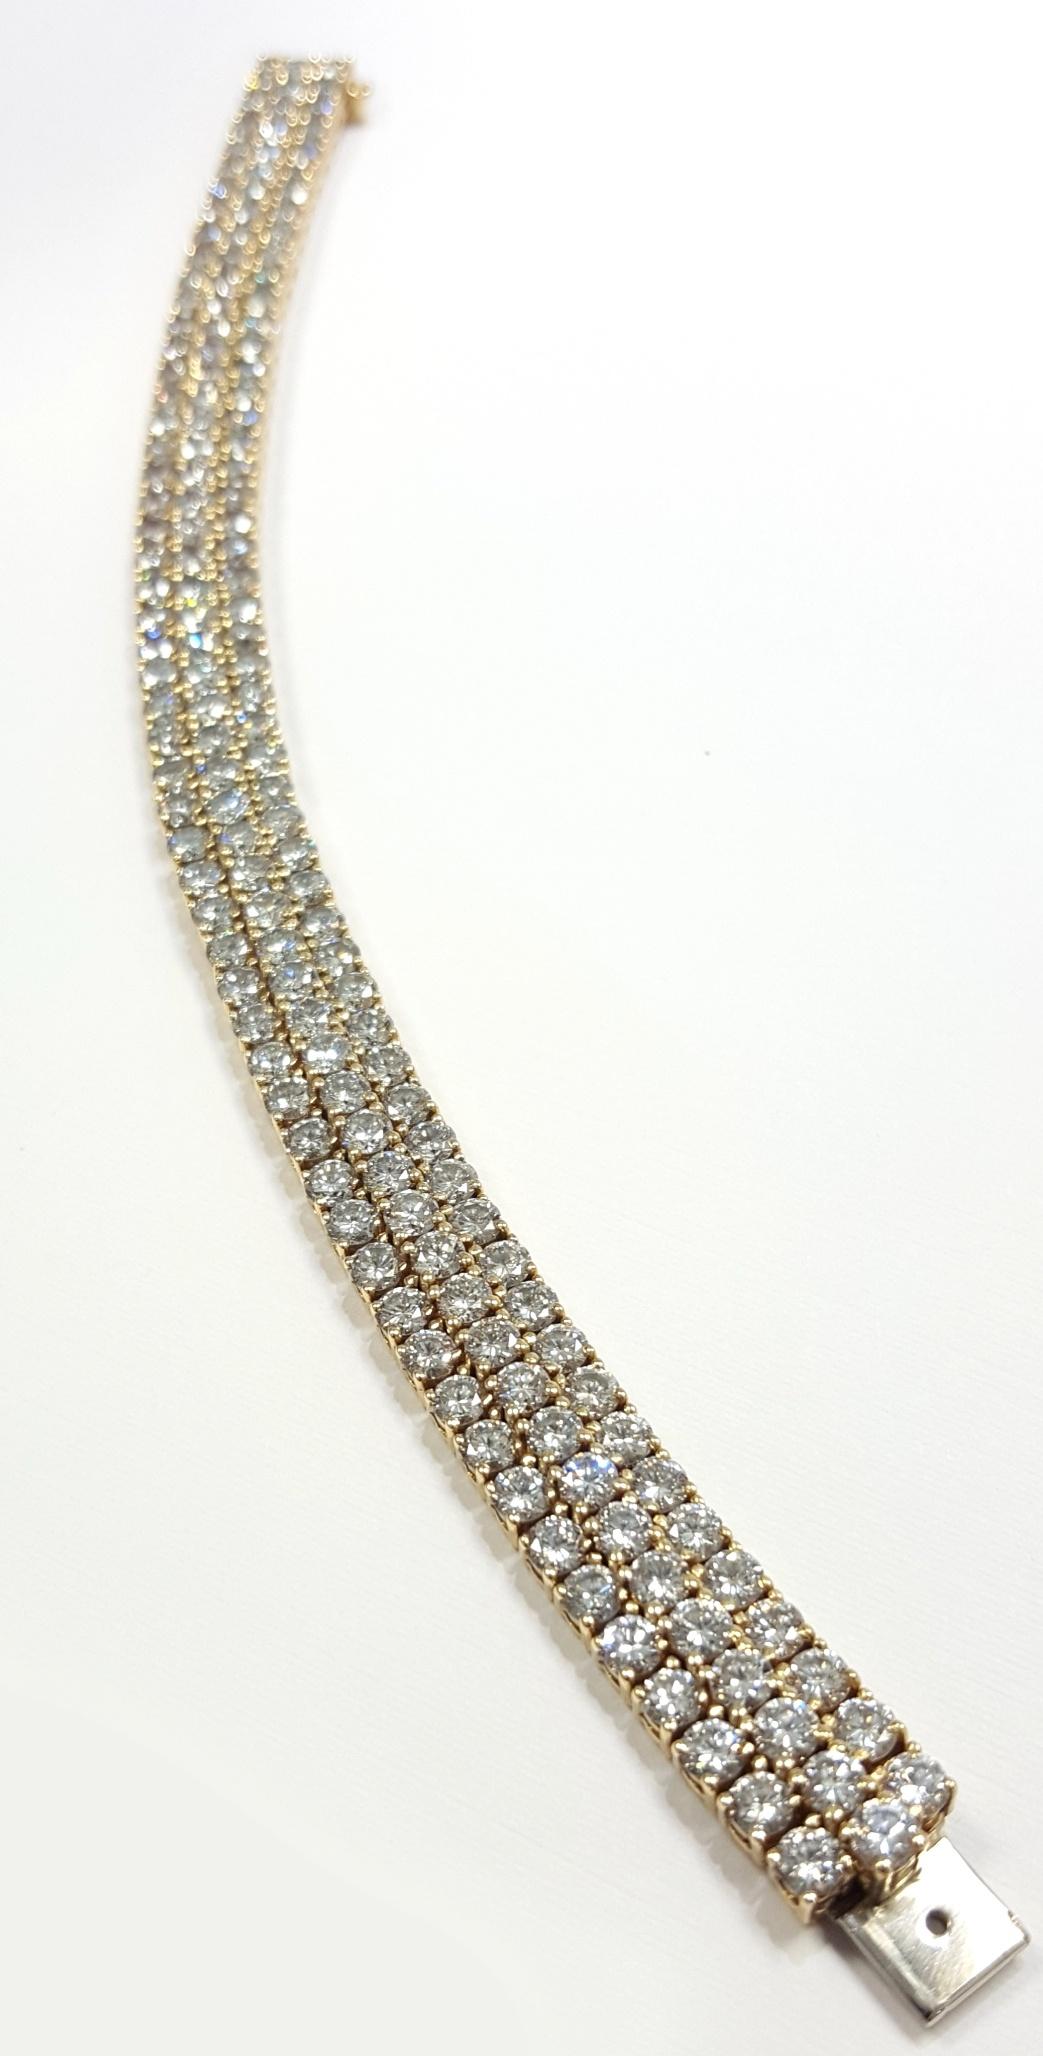 An expertly made yellow gold bracelet. There are 162 Round Brilliant cut diamonds that are G to H color VS1 to VS2 clarity. The diamonds are set in 3 rows and are set in four prong basket style settings. The bracelet measures 6 and 7/8 inches long